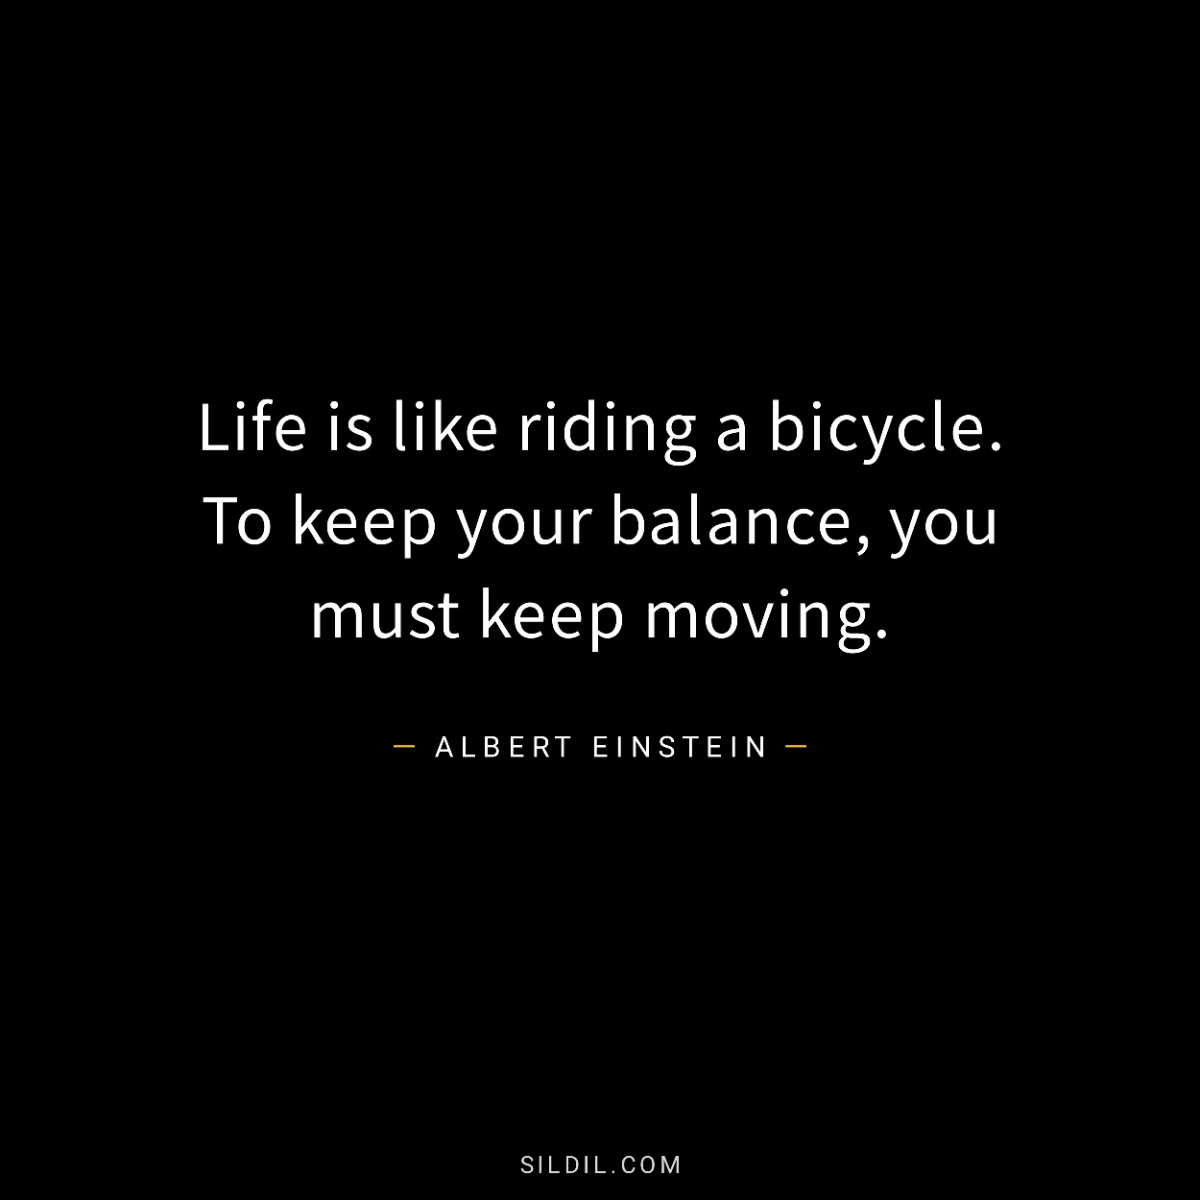 Life is like riding a bicycle. To keep your balance, you must keep moving.